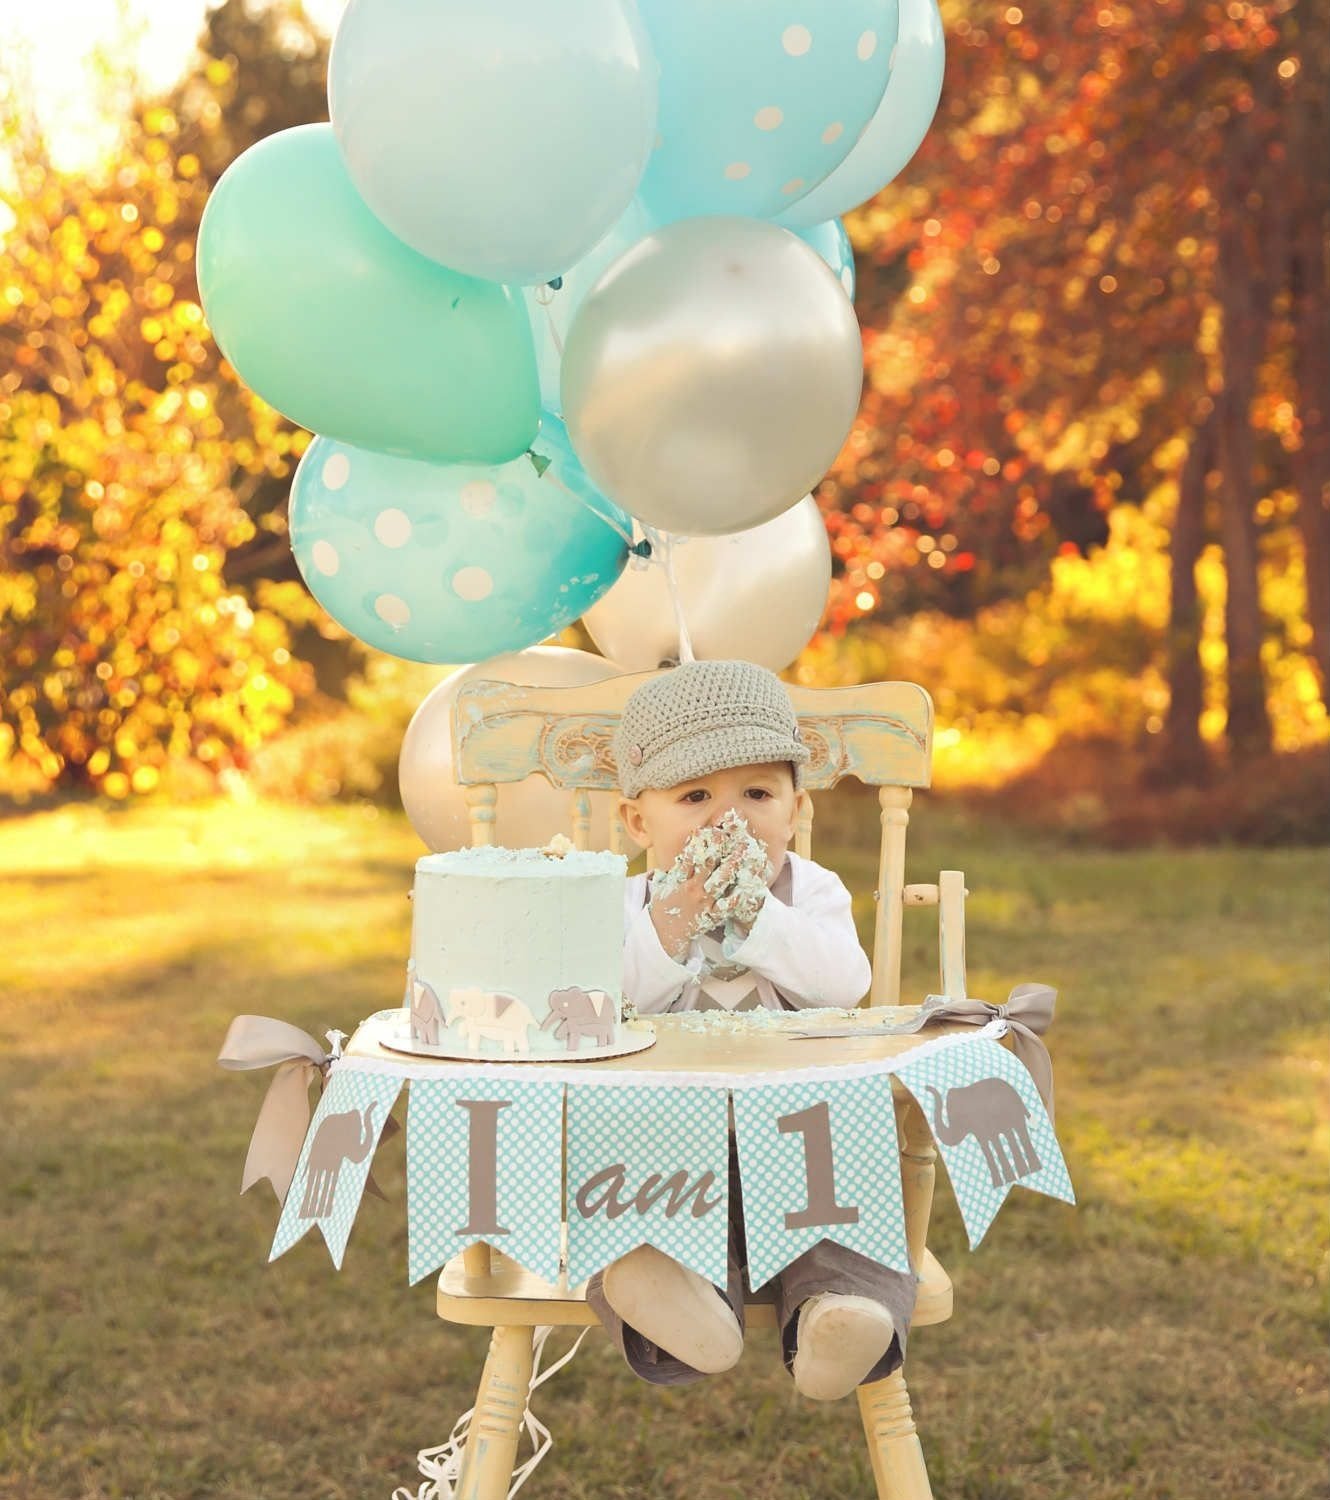 10 Lovely 1 Year Birthday Party Ideas 10 1st birthday party ideas for boys part 2 birthday decorations 12 2022